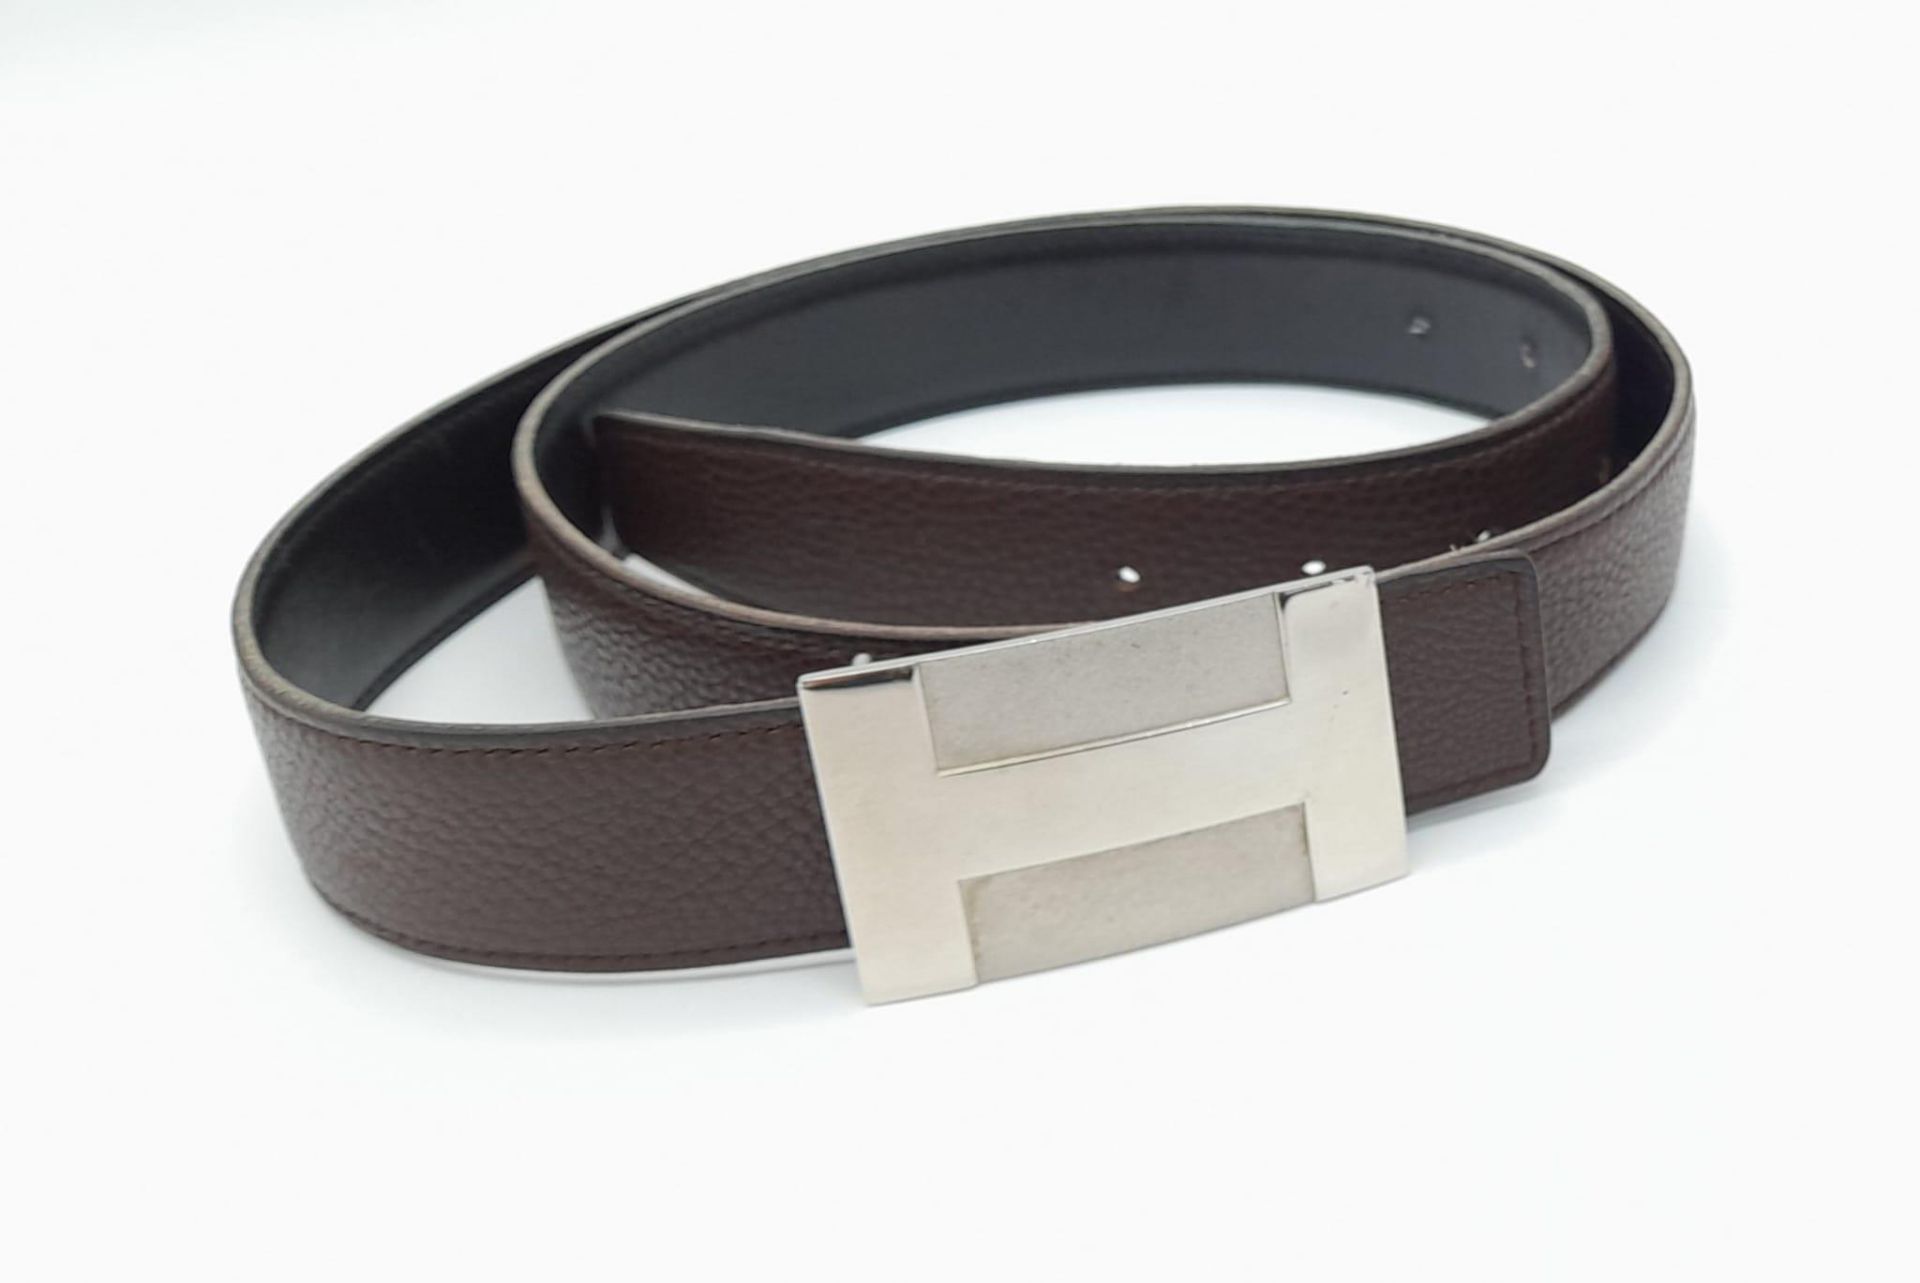 Brown Leather HERMES Belt. Features large Hermes H belt buckle and measures 110cm in length. See